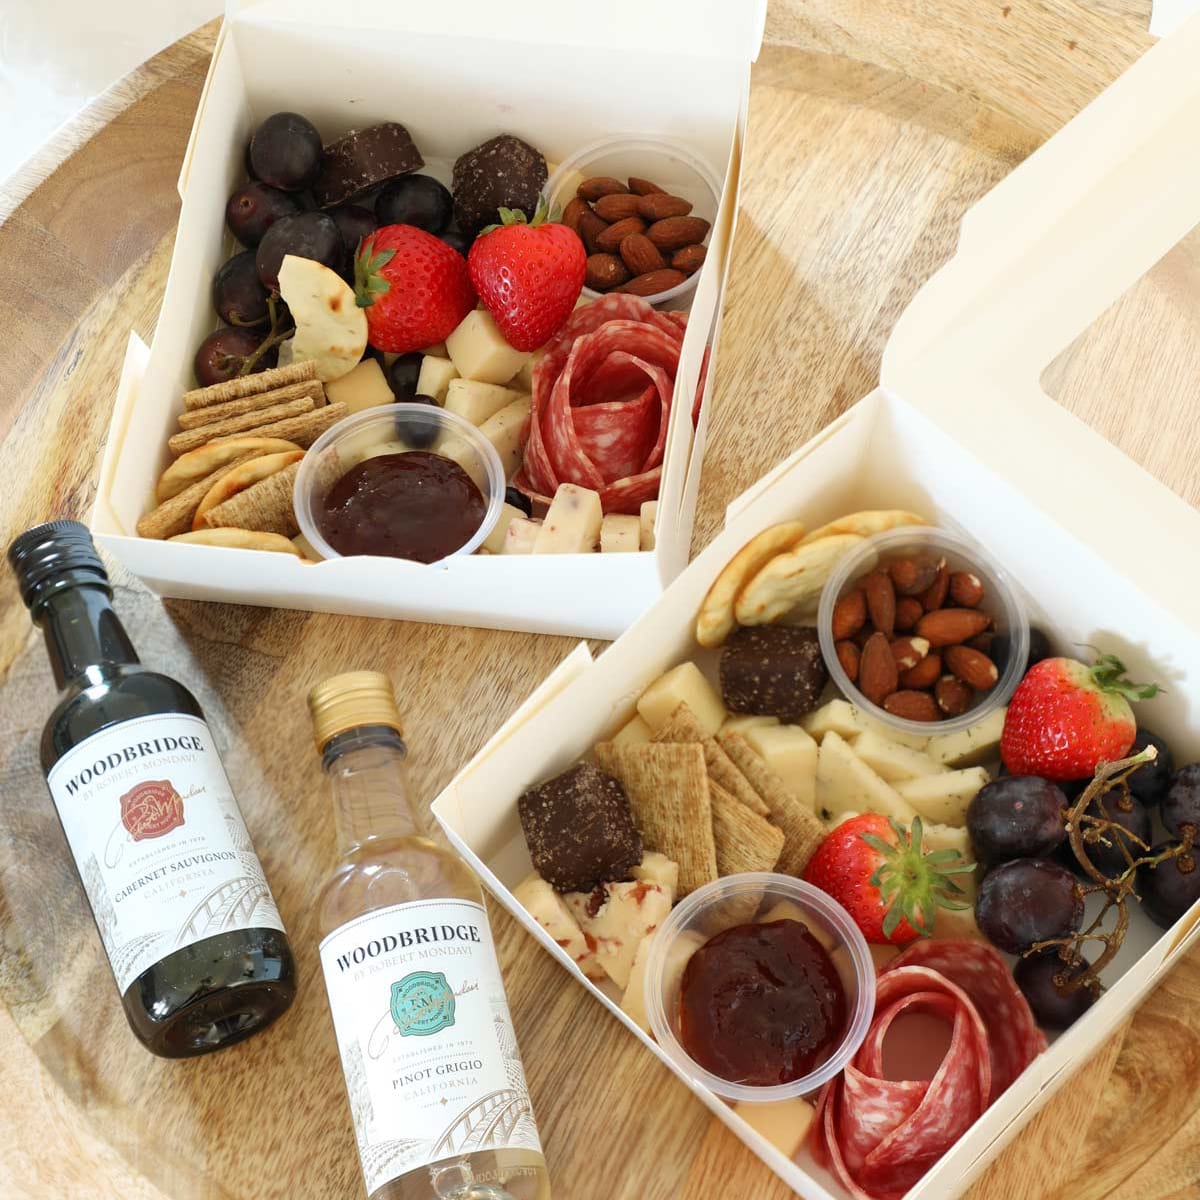 How to Make Individual Charcuterie Boxes - Easy DIY + Supply List